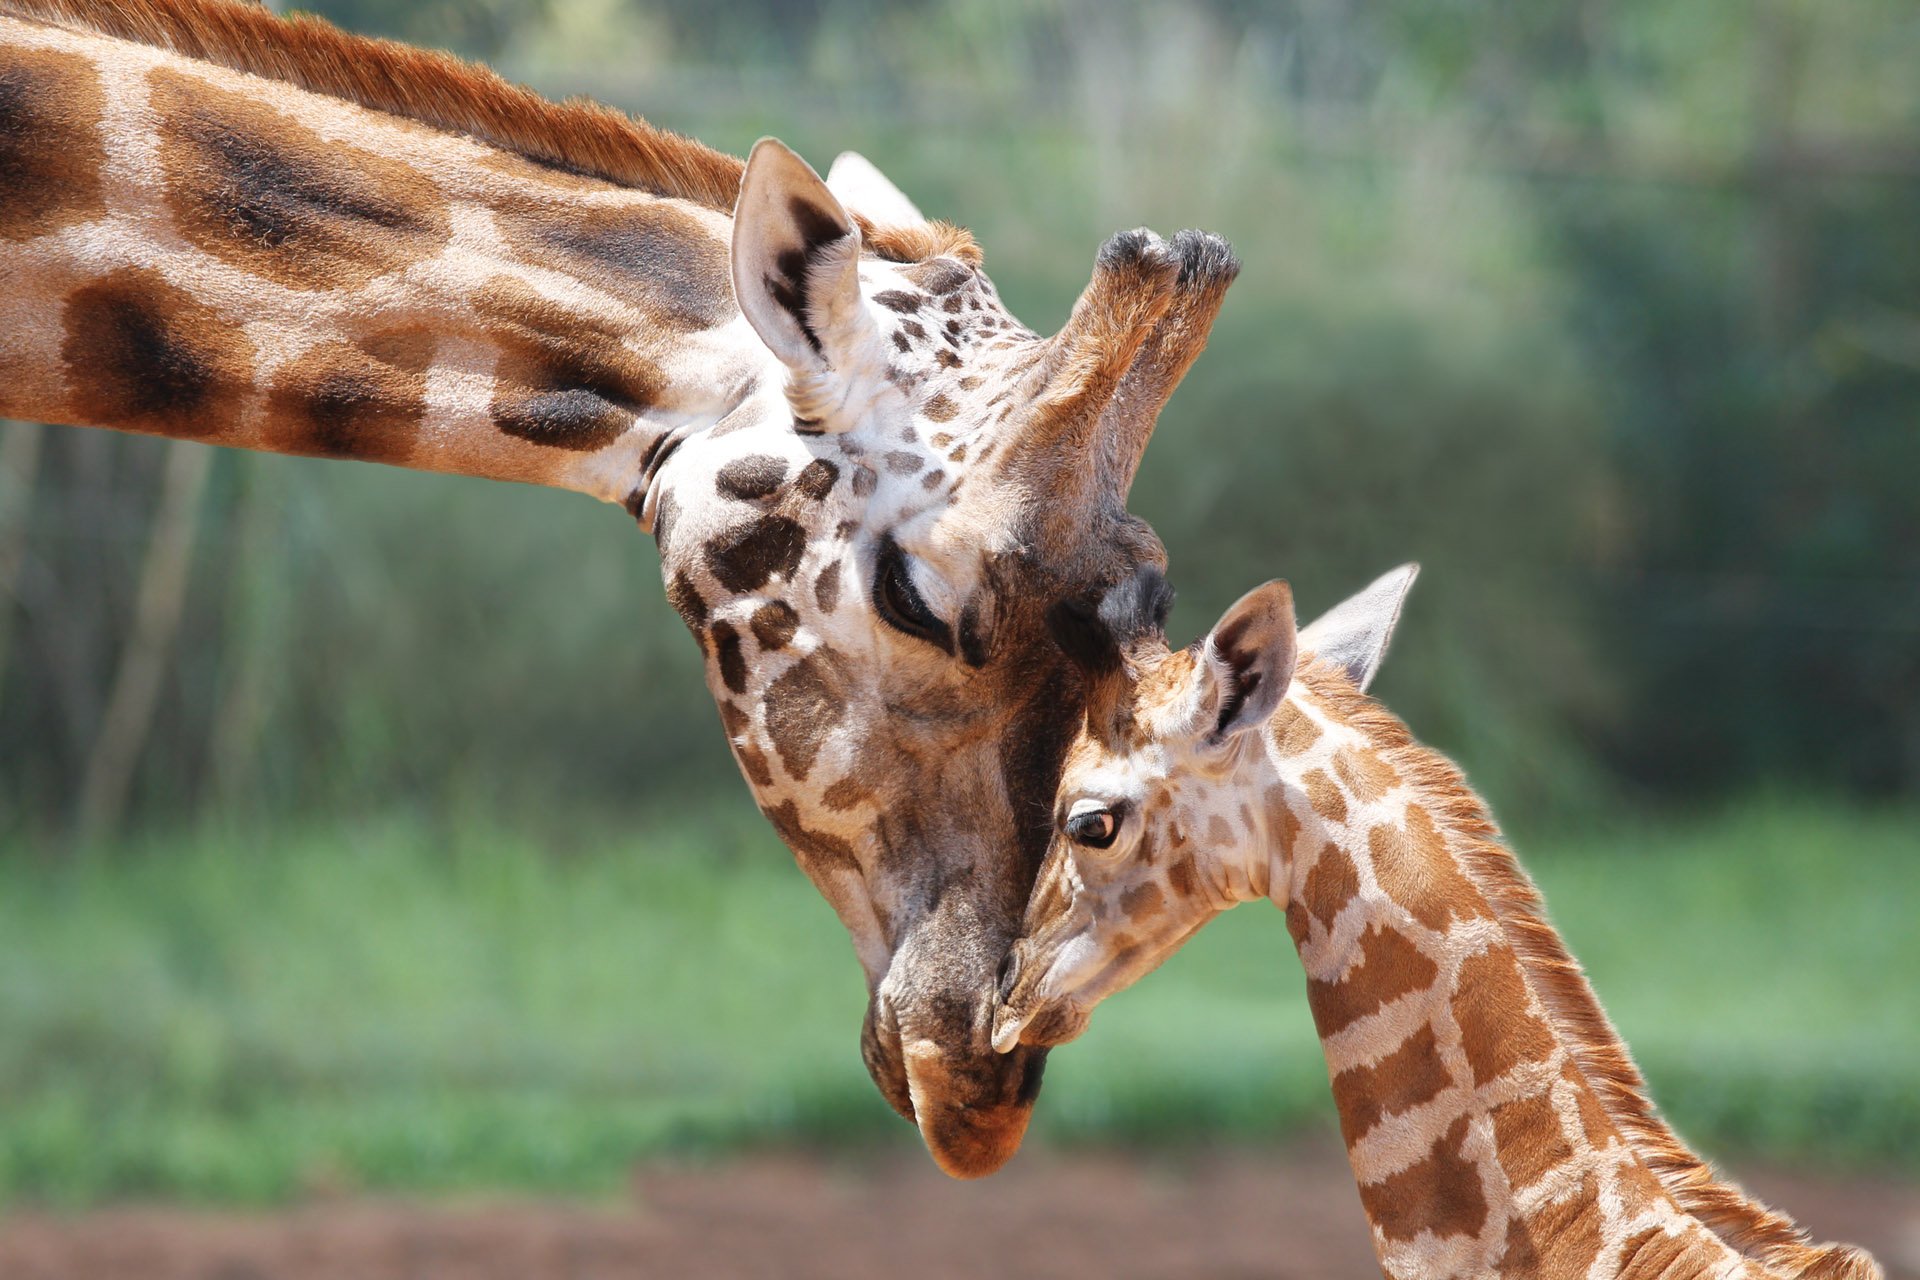 30 Most interesting facts about Giraffes!